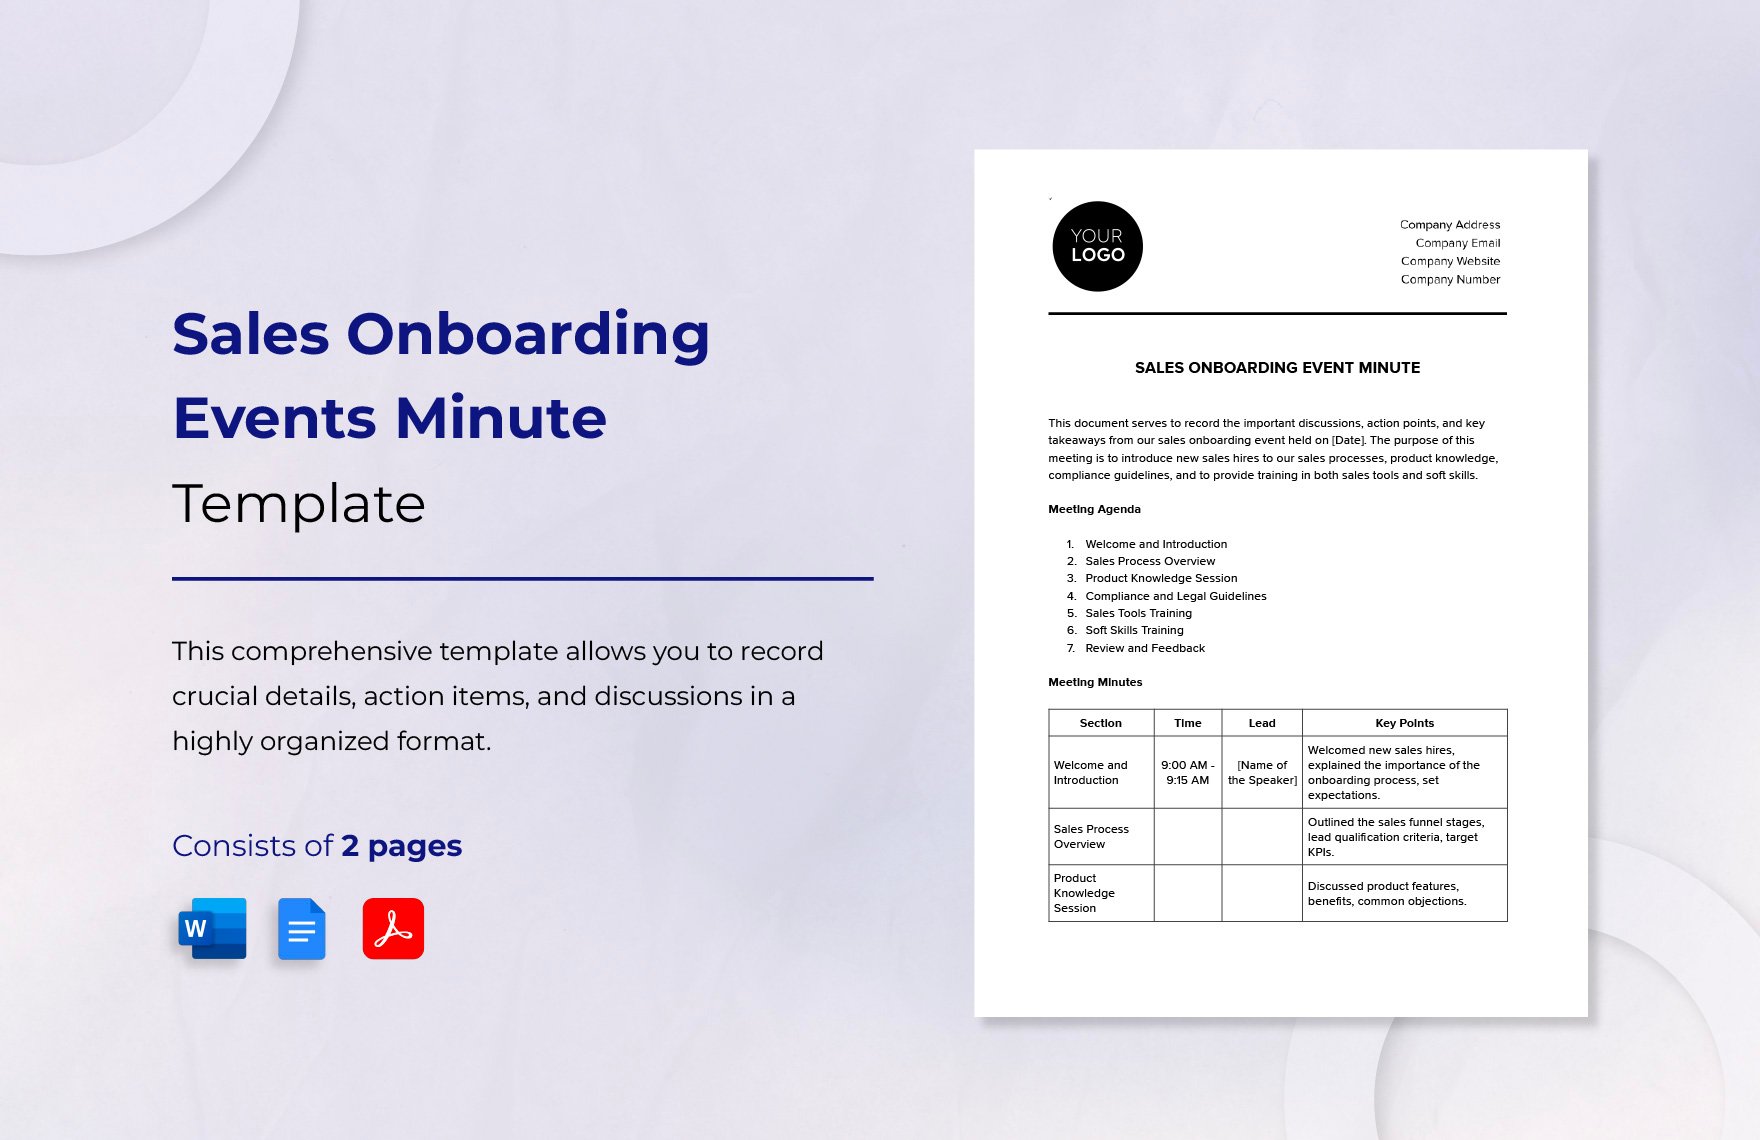 Sales Onboarding Events Minute Template